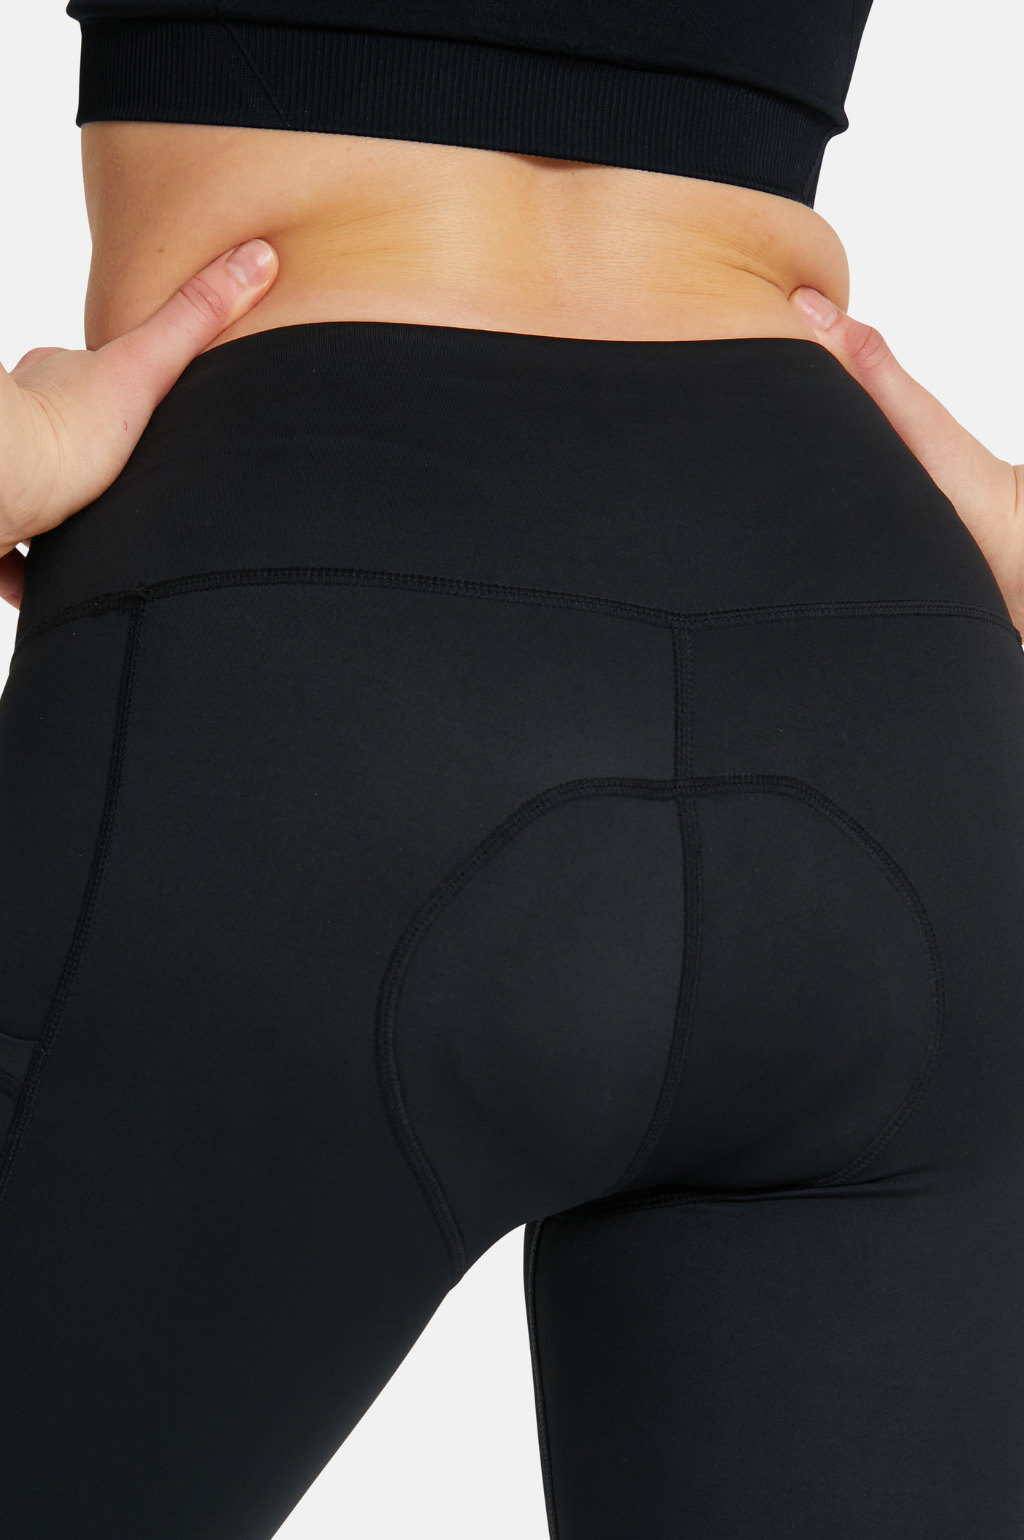 Back of FitPink padded cycling shorts in black